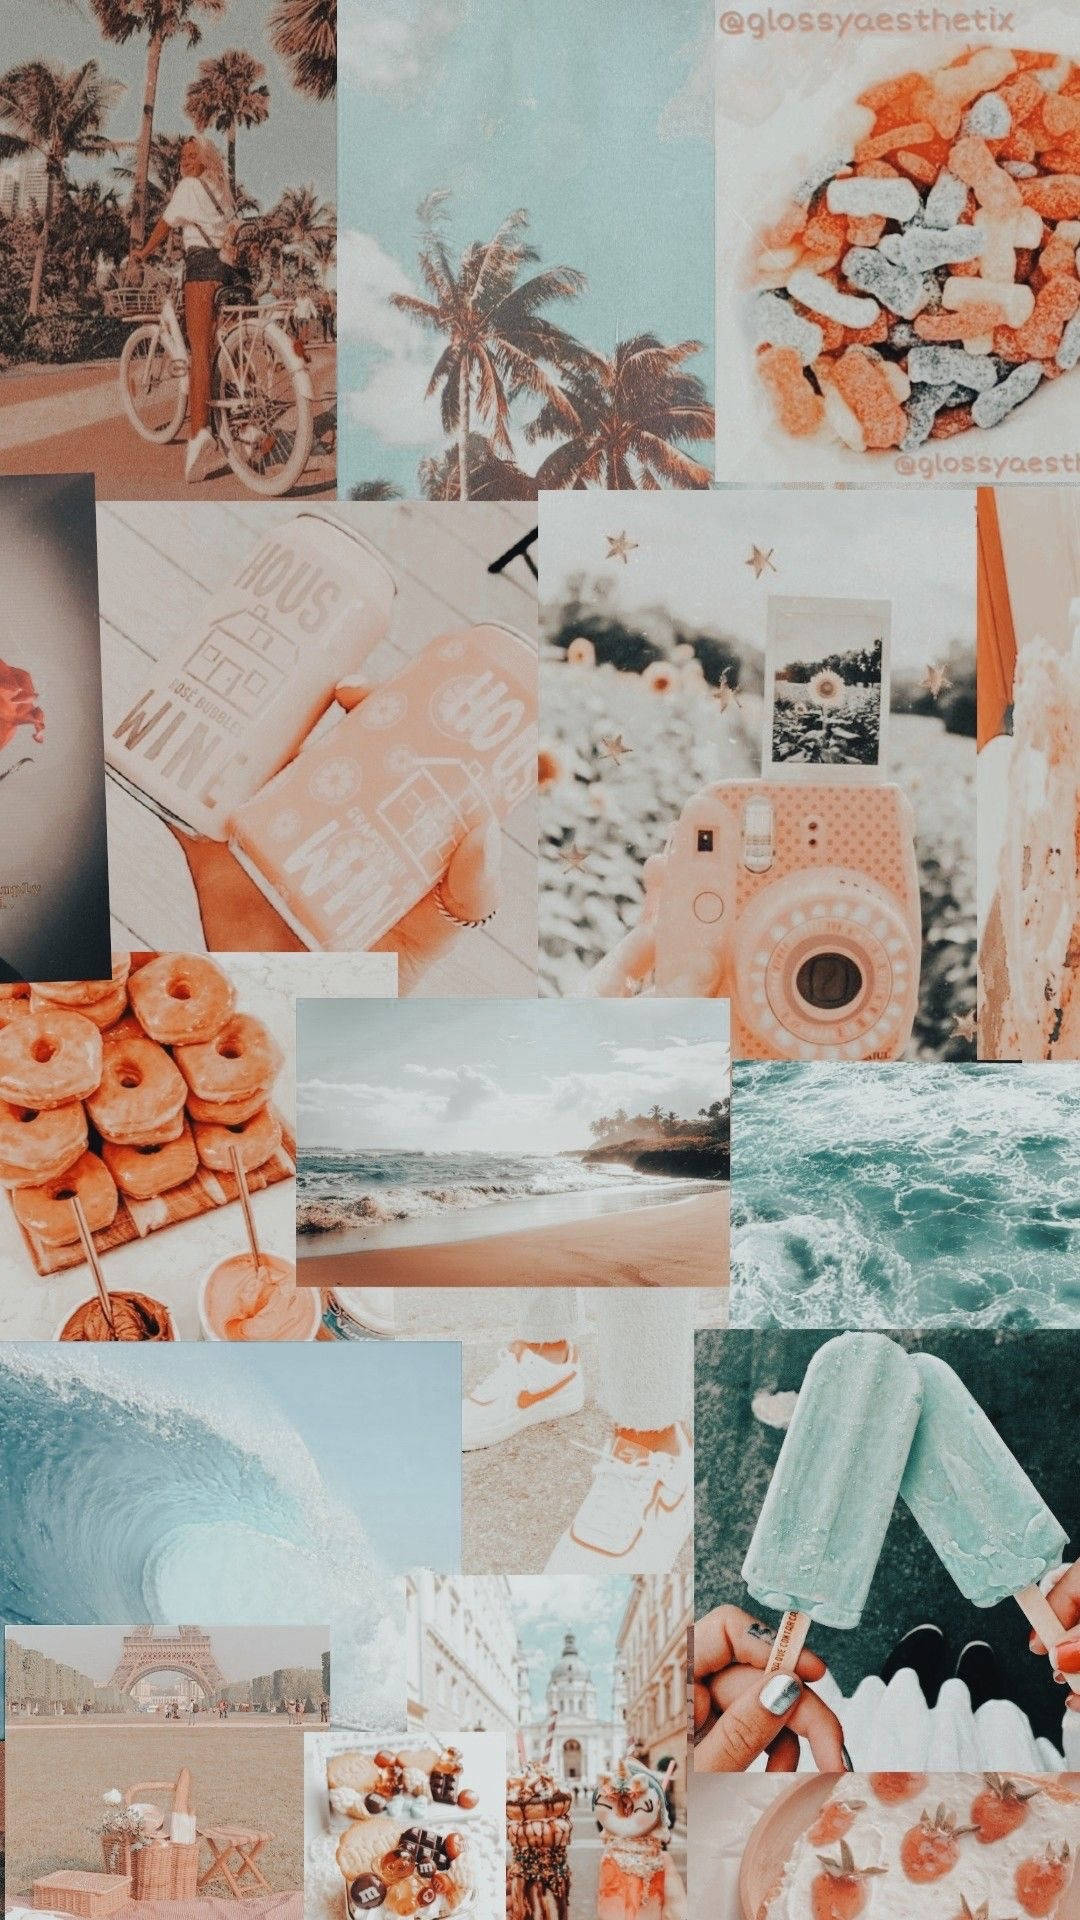 A Collage Of Pictures Of Beach, Beach, And Other Things Background